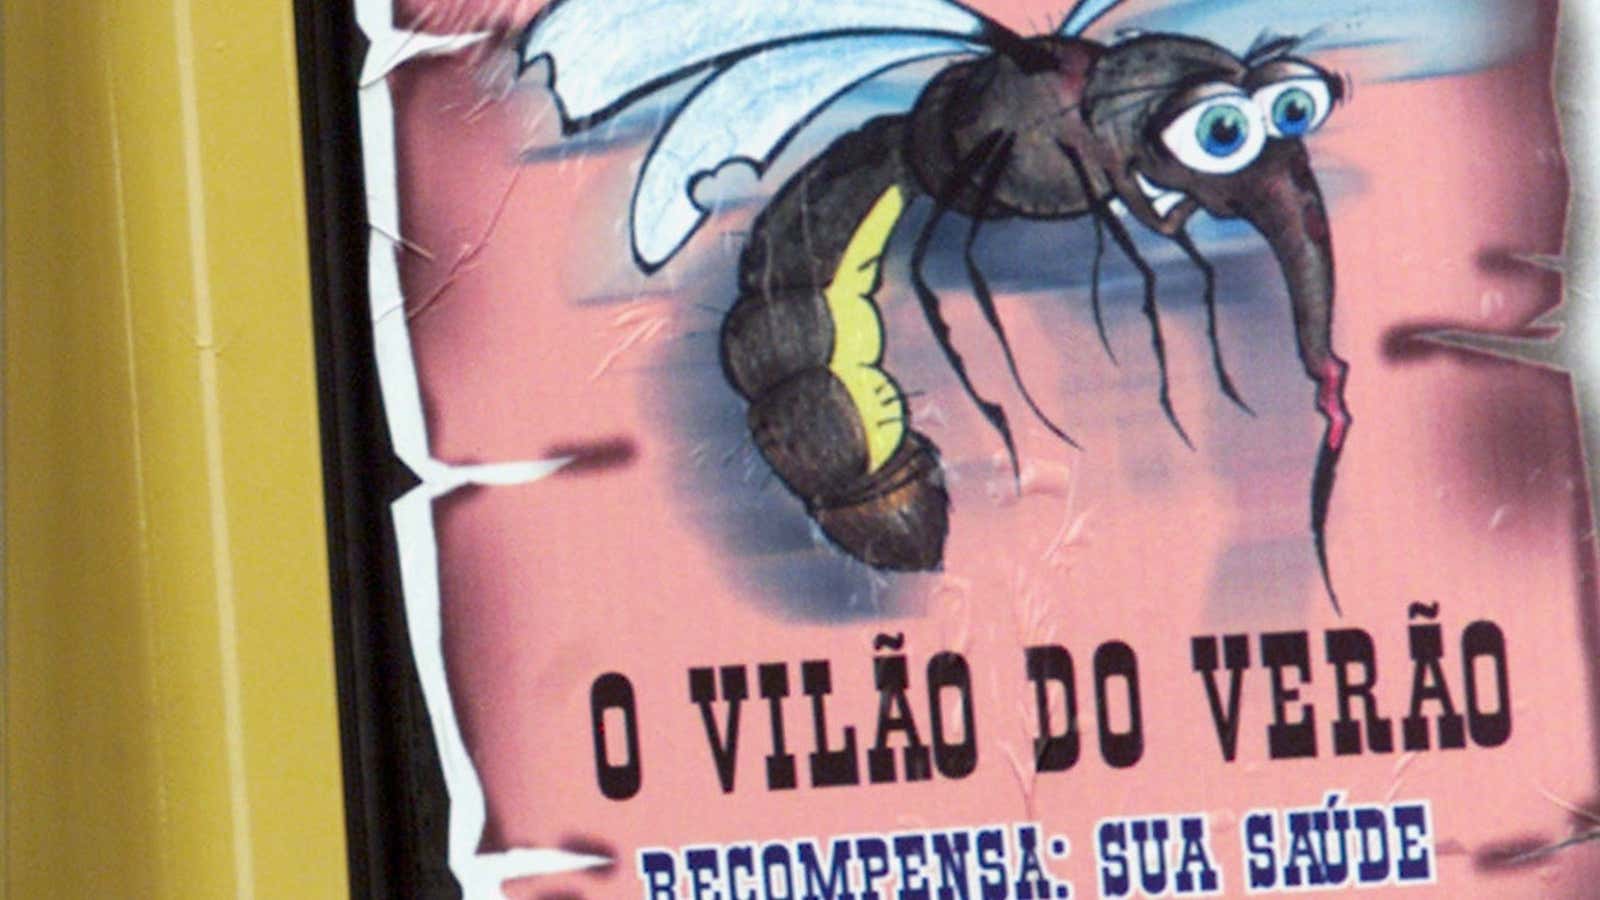 Could mosquitoes be made less villainous?